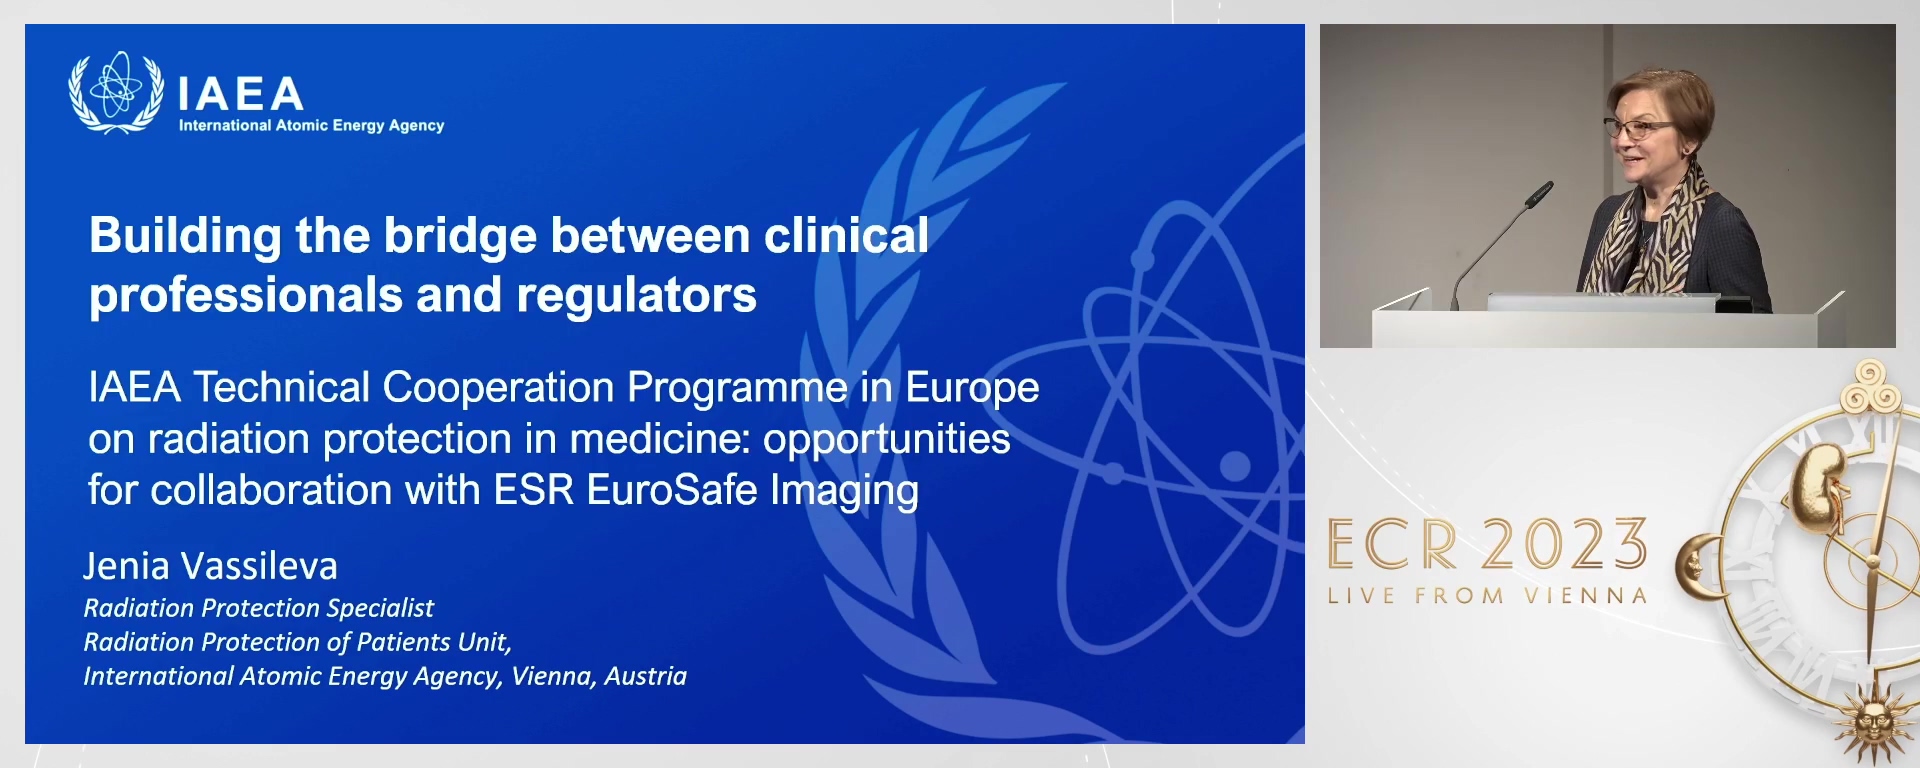 Building the bridge between clinical professionals and regulators. IAEA Technical Cooperation Programme in Europe on radiation protection in medicine: opportunities for collaboration with ESR EuroSafe Imaging